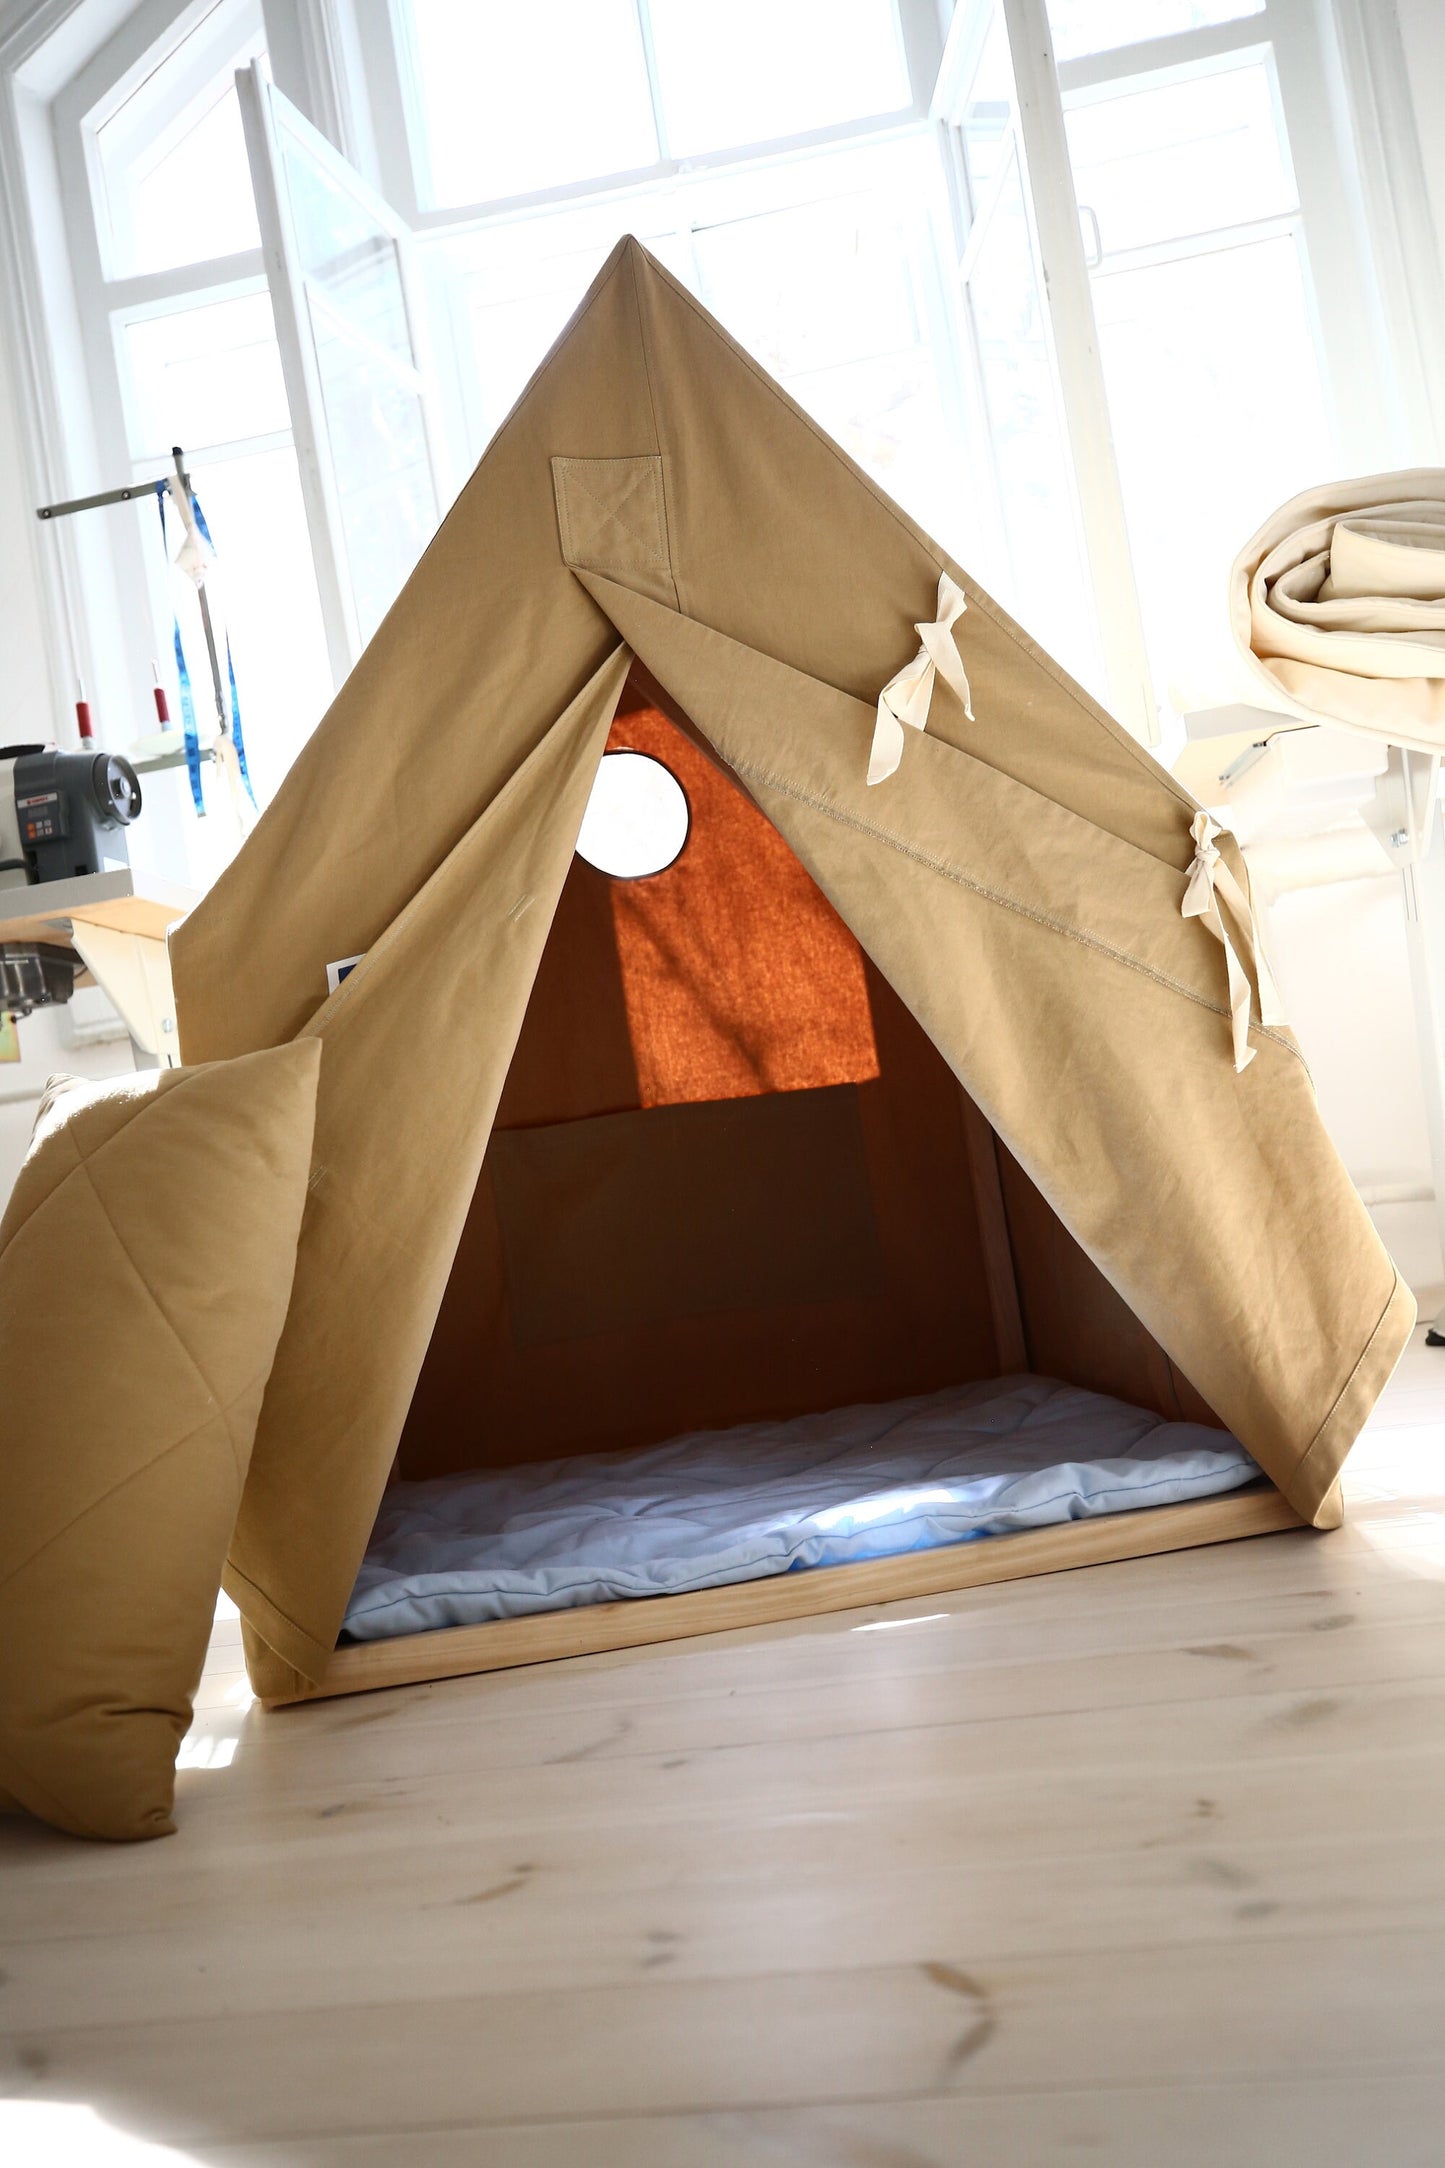 Cotton Tent - Nordic Tipi, Simple Playhouse, Fun Tents For Kids, Small Gazebo Tent, Children'S Inside Play Tents - Christmas presents